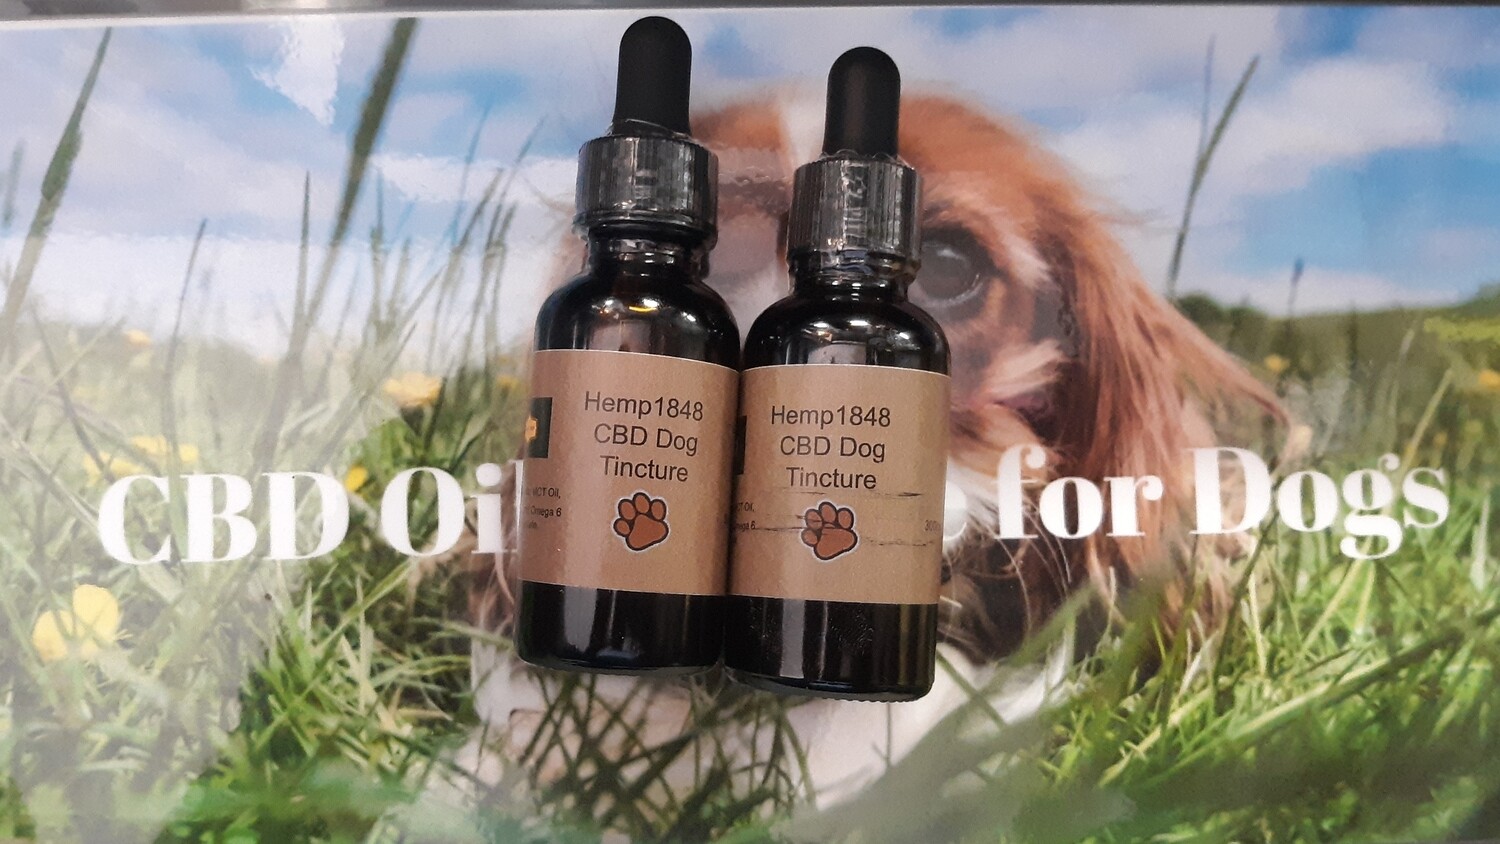 Furry Friend Tinctures 300mg